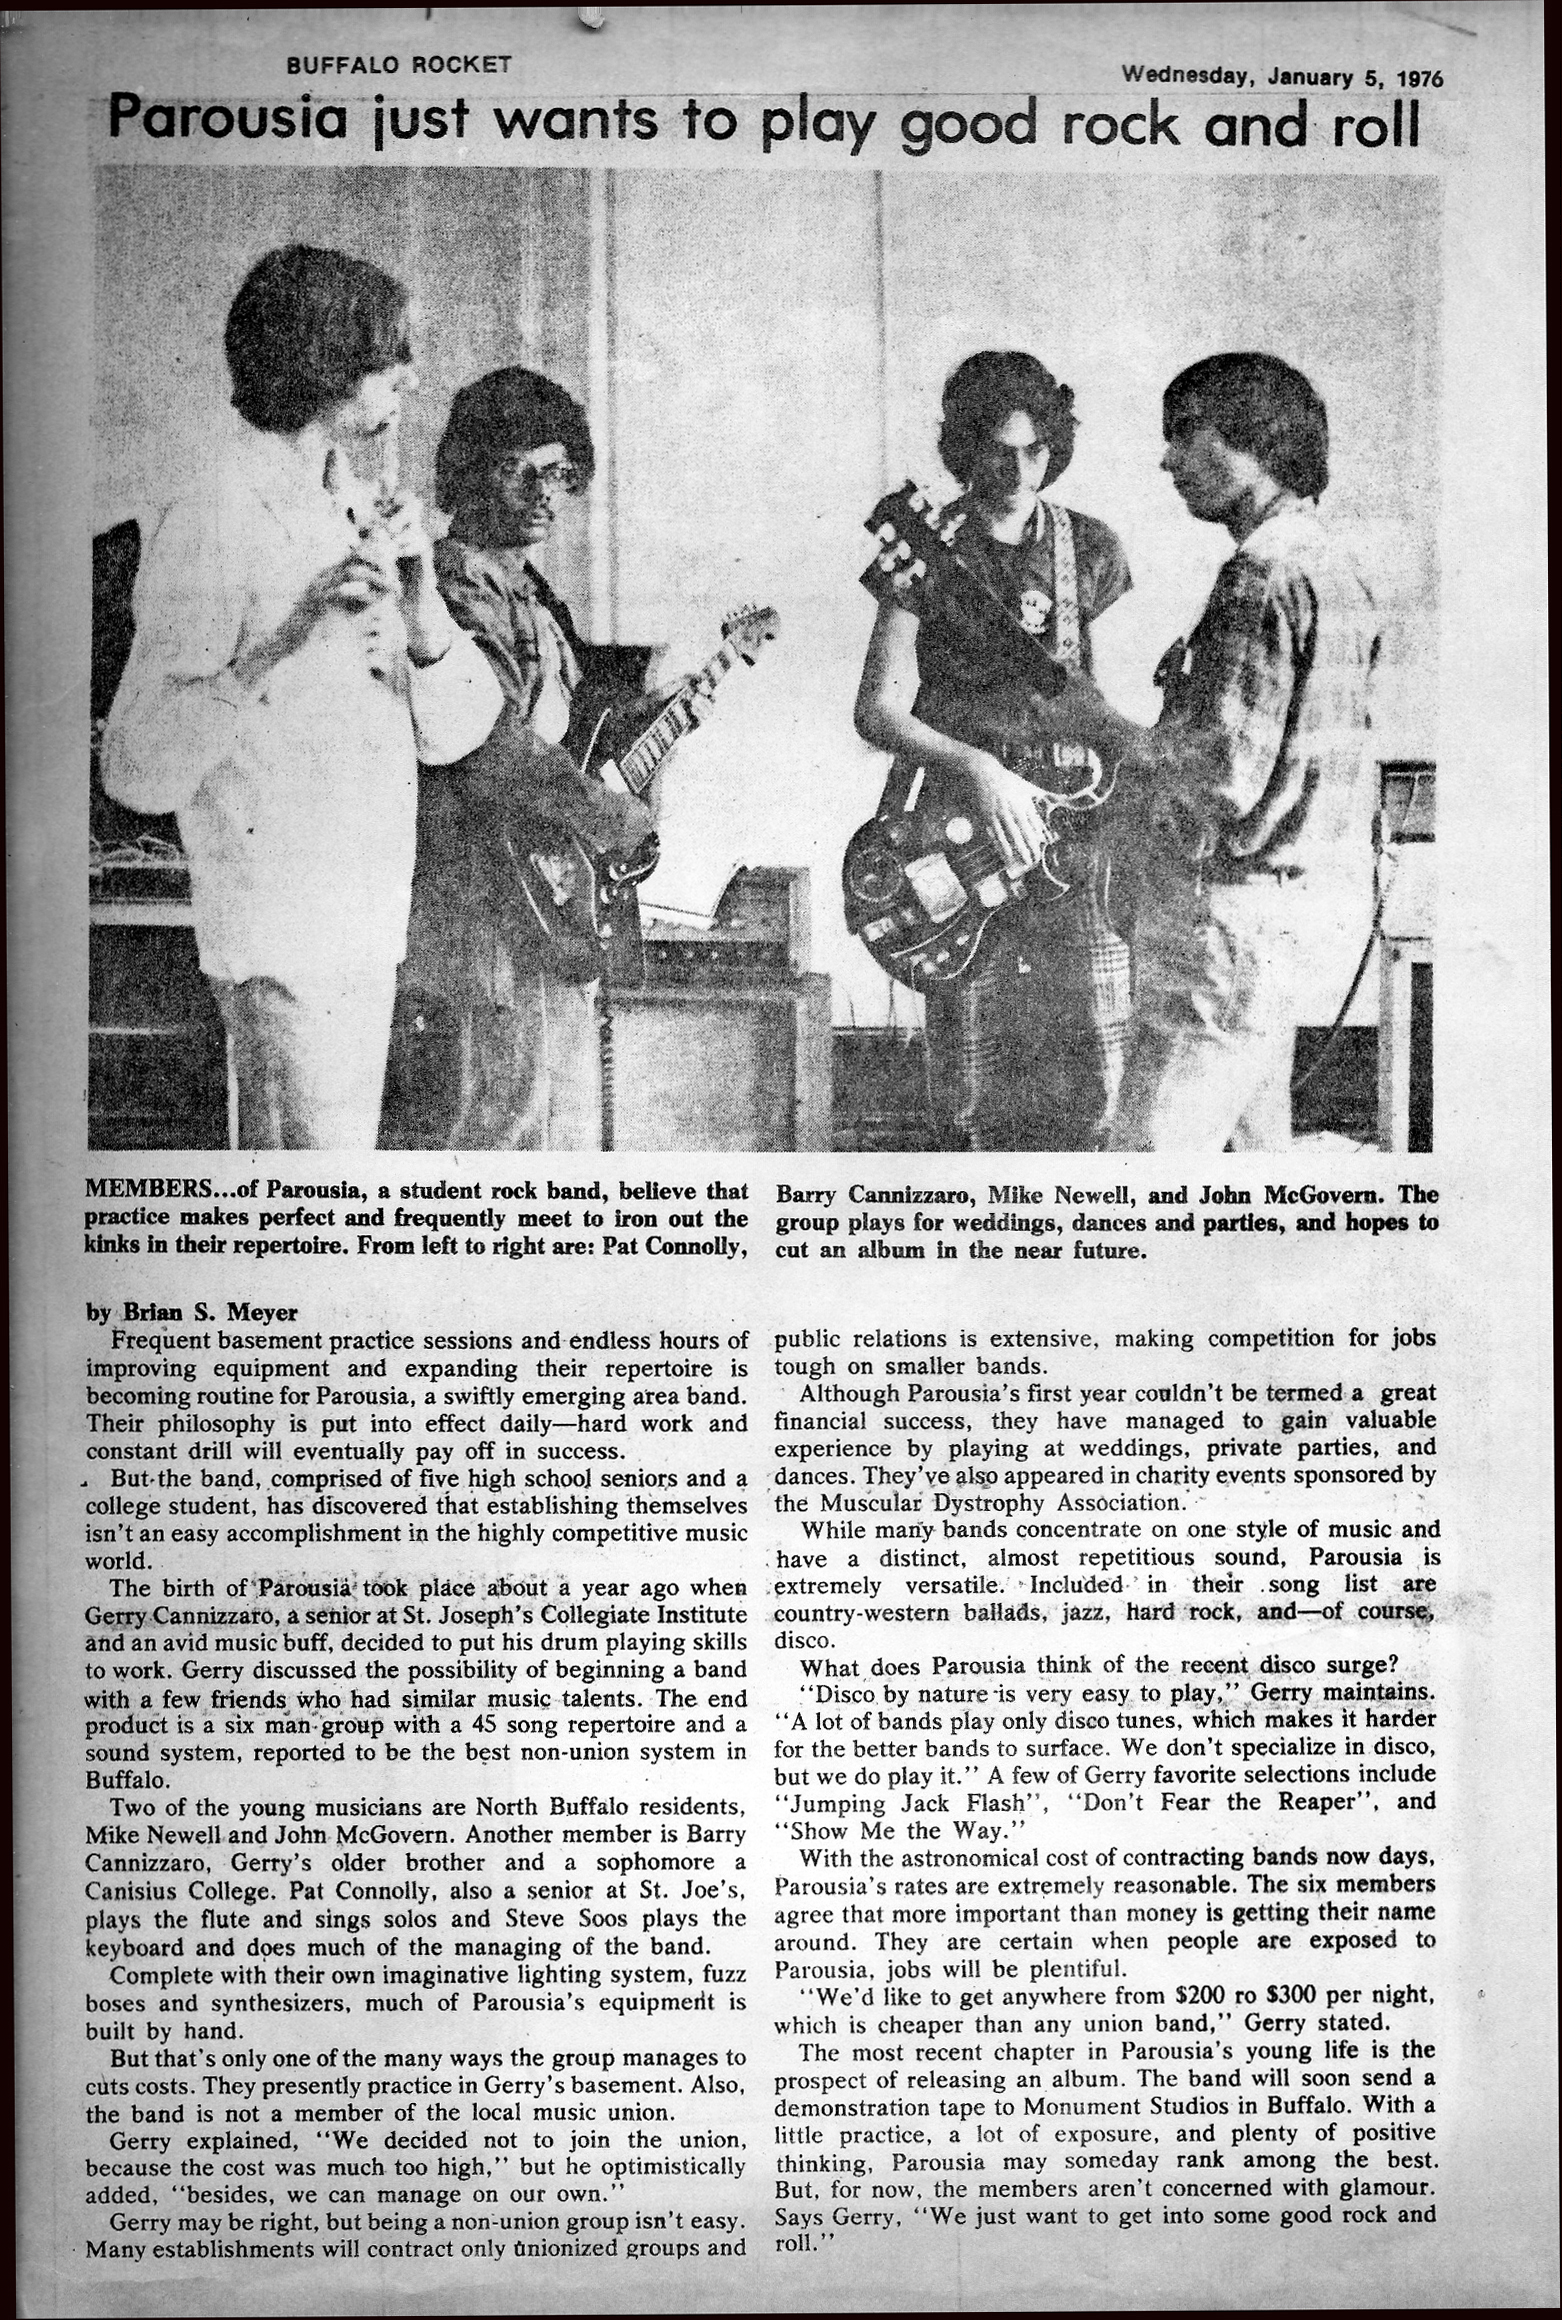 Parousia Band review in The Buffalo Rocket Newspaper January 5th 1976